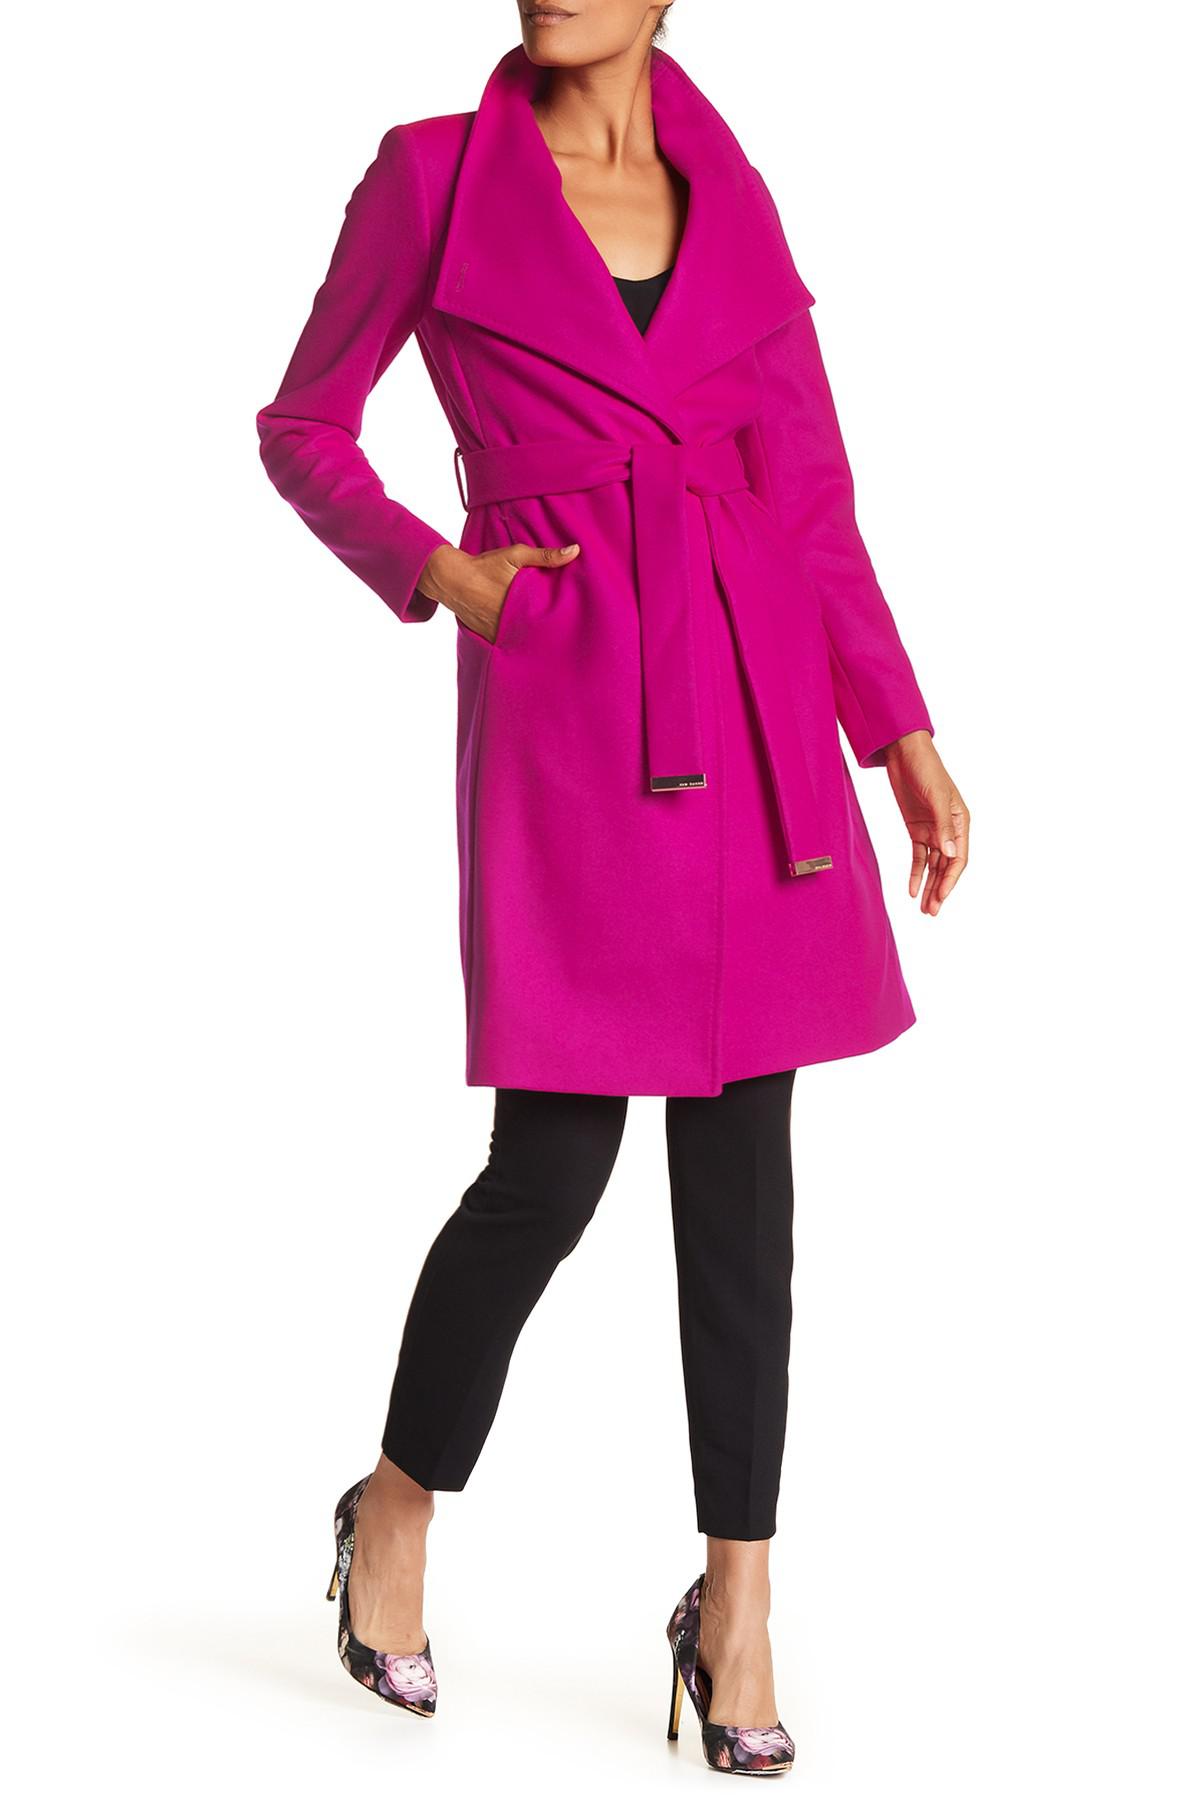 Ted Baker Aurore Wool-blend Coat in Pink - Lyst